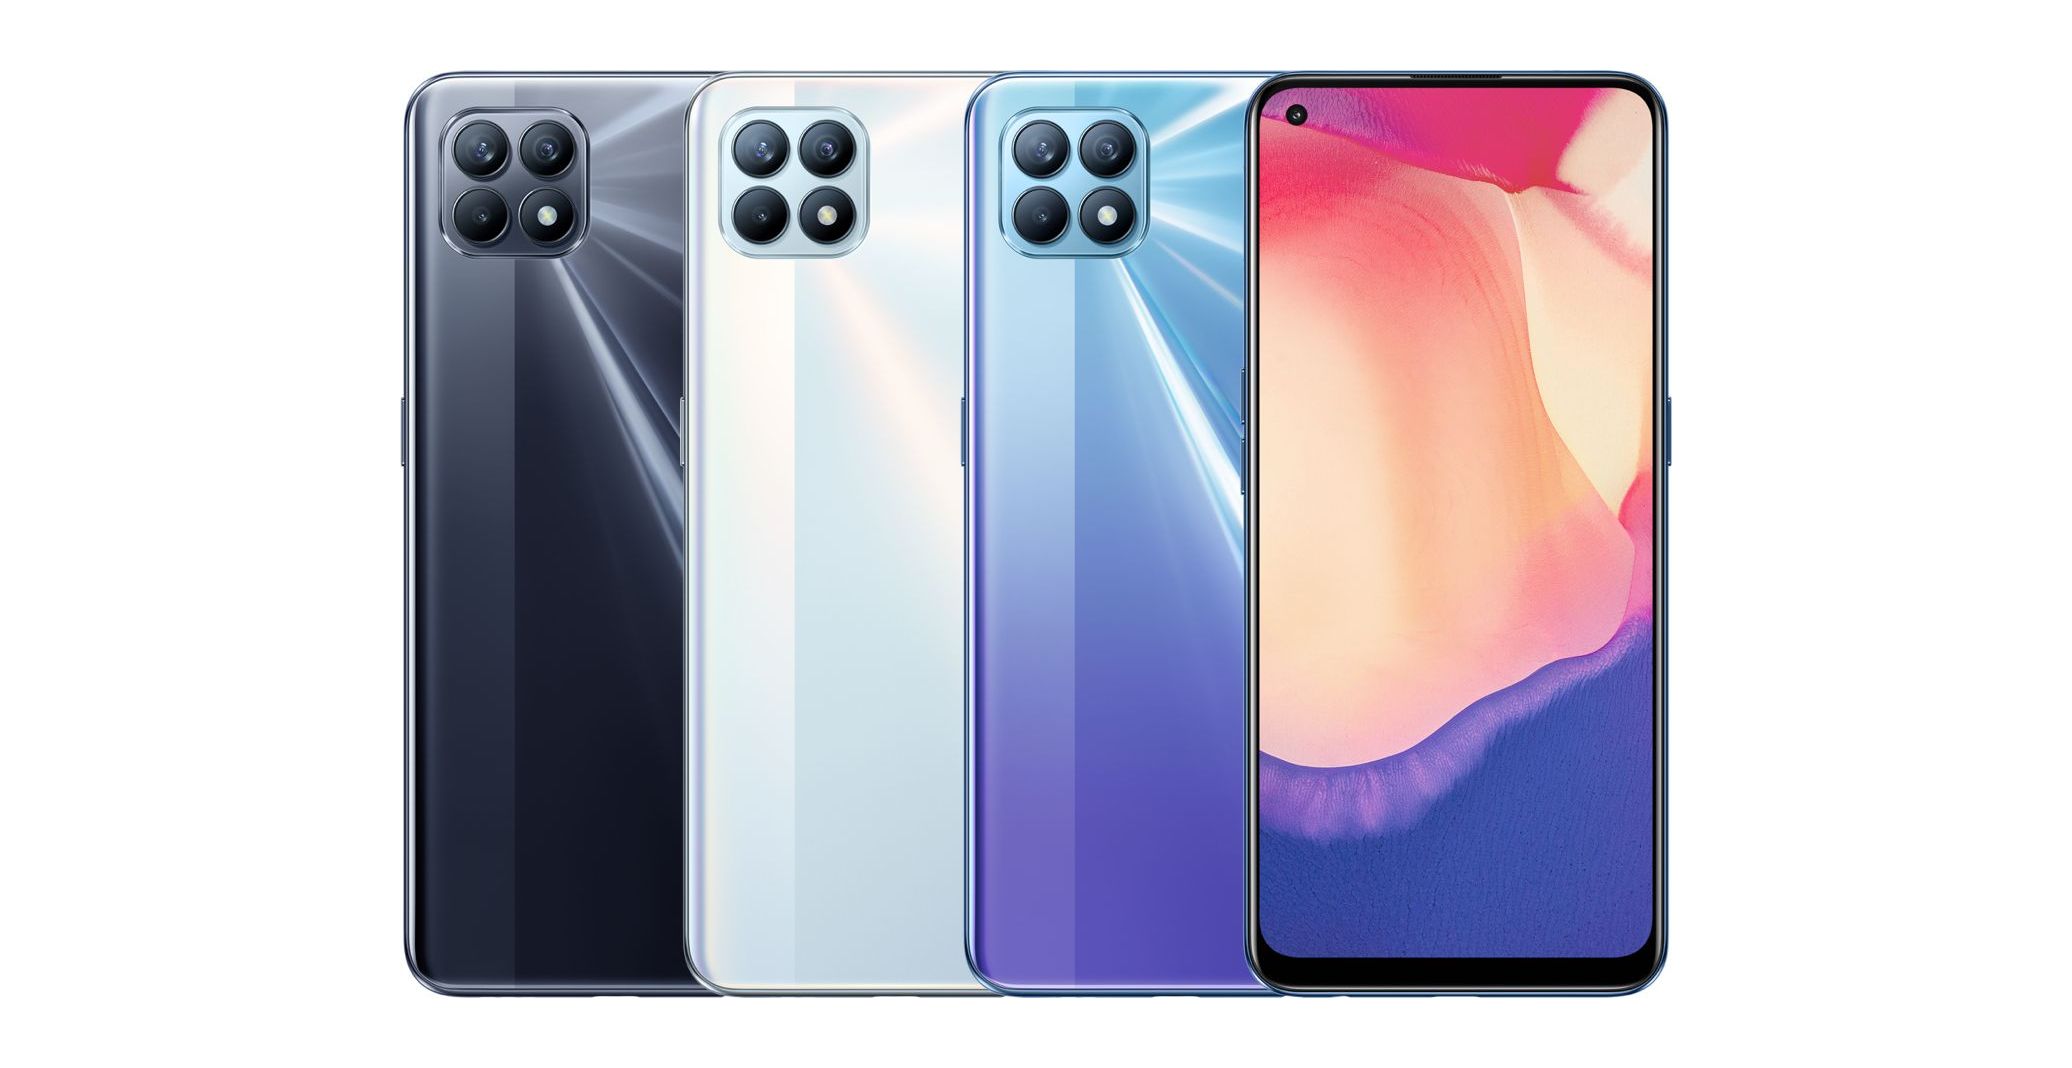 OPPO Reno4 SE 5G with 6.43-inch display, 32MP selfie camera, 48MP triple cameras and 65W charging unveiled